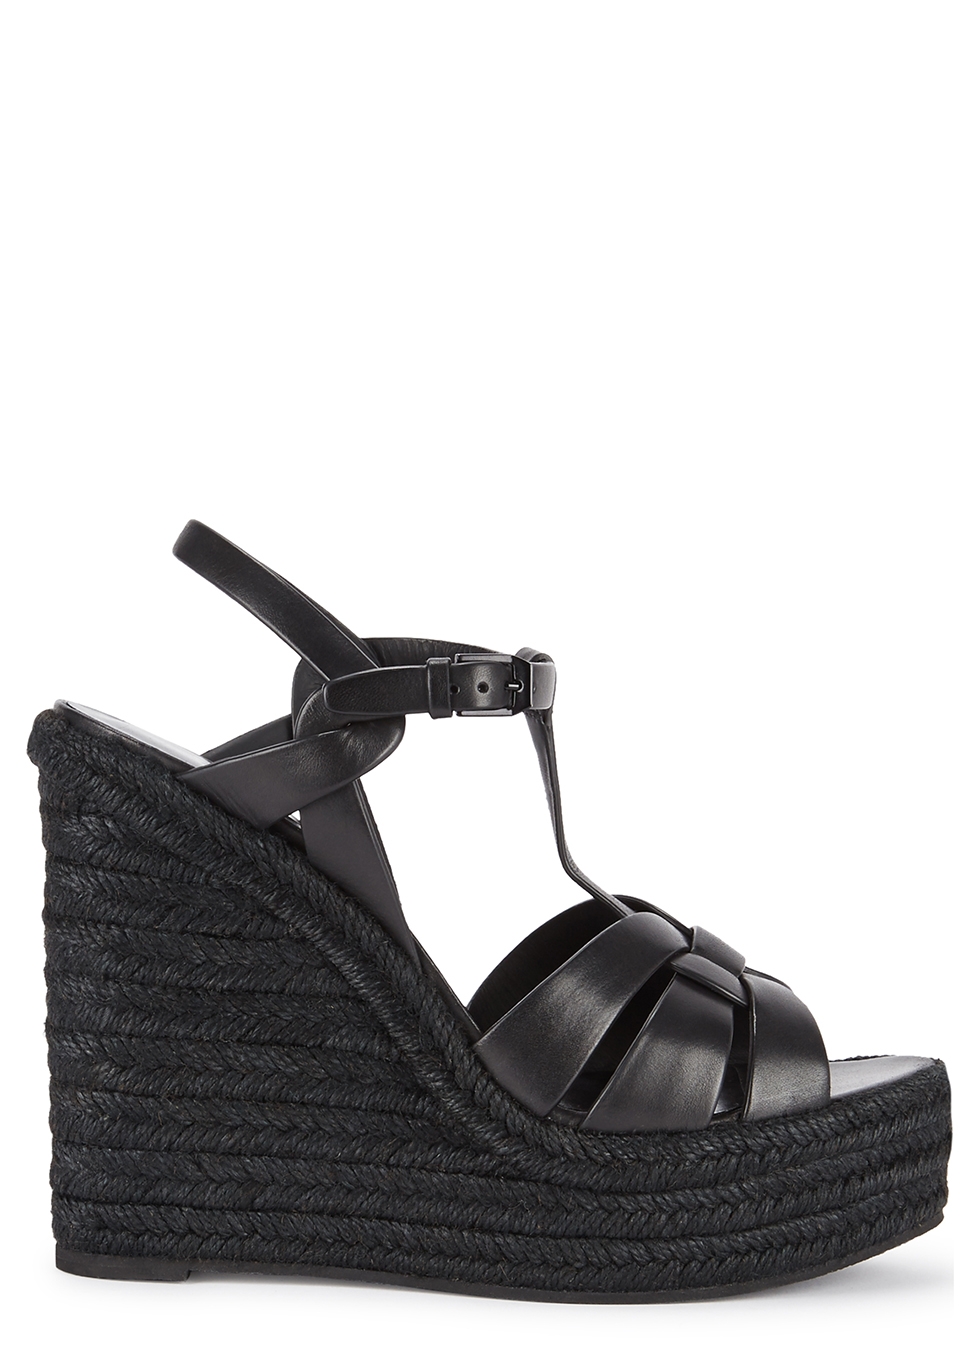 Tribute 125 black leather wedge sandals